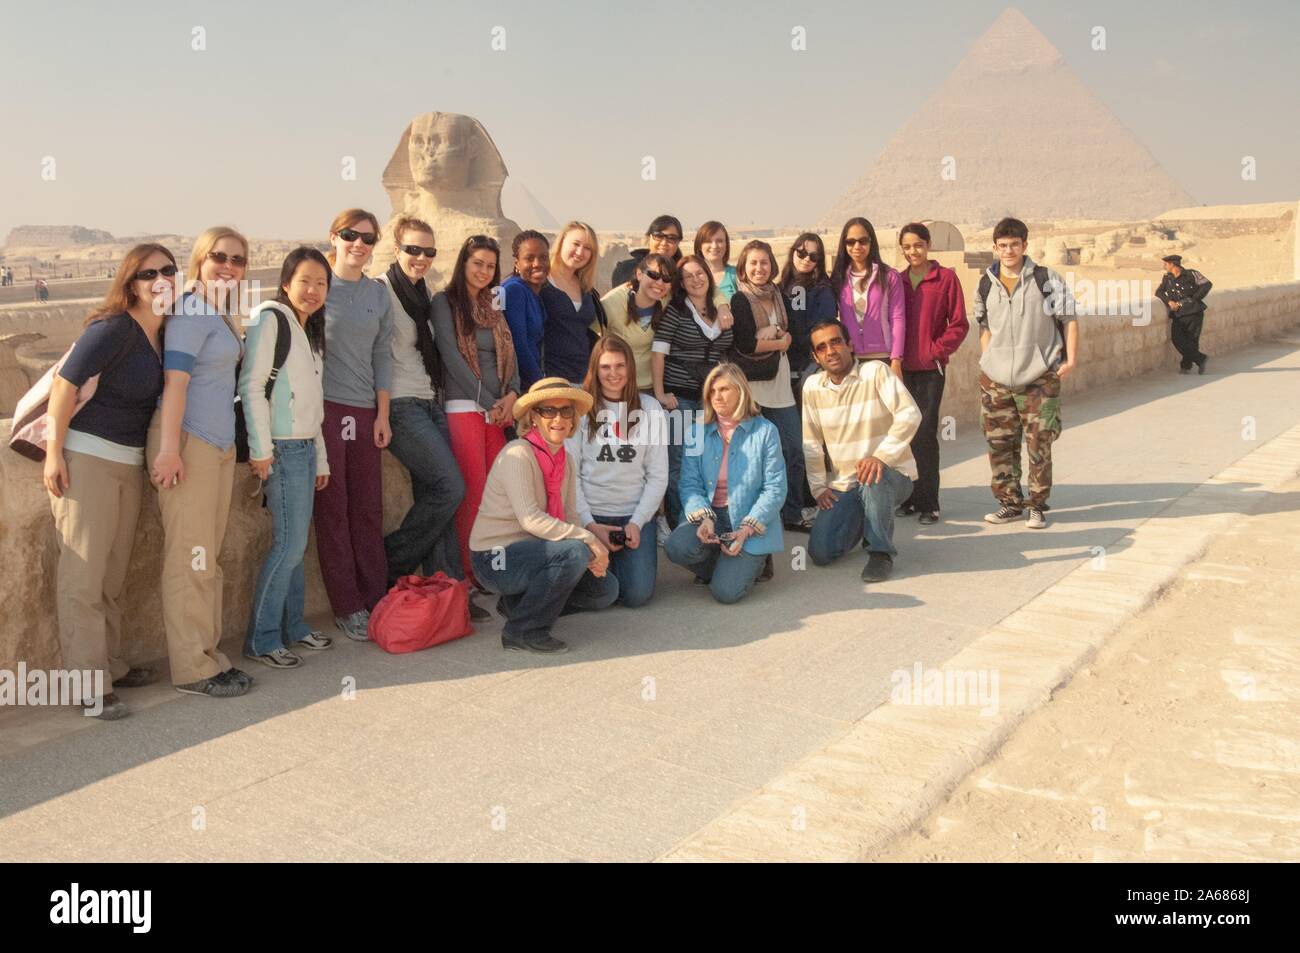 Egyptologist Betsy Bryan poses with a row of Johns Hopkins University students, outside on a sunny day, with a low stone wall, and with the Sphinx and a pyramid visible in the background, Giza, Egypt during a study abroad program, January 7, 2008. From the Homewood Photography Collection. () Stock Photo